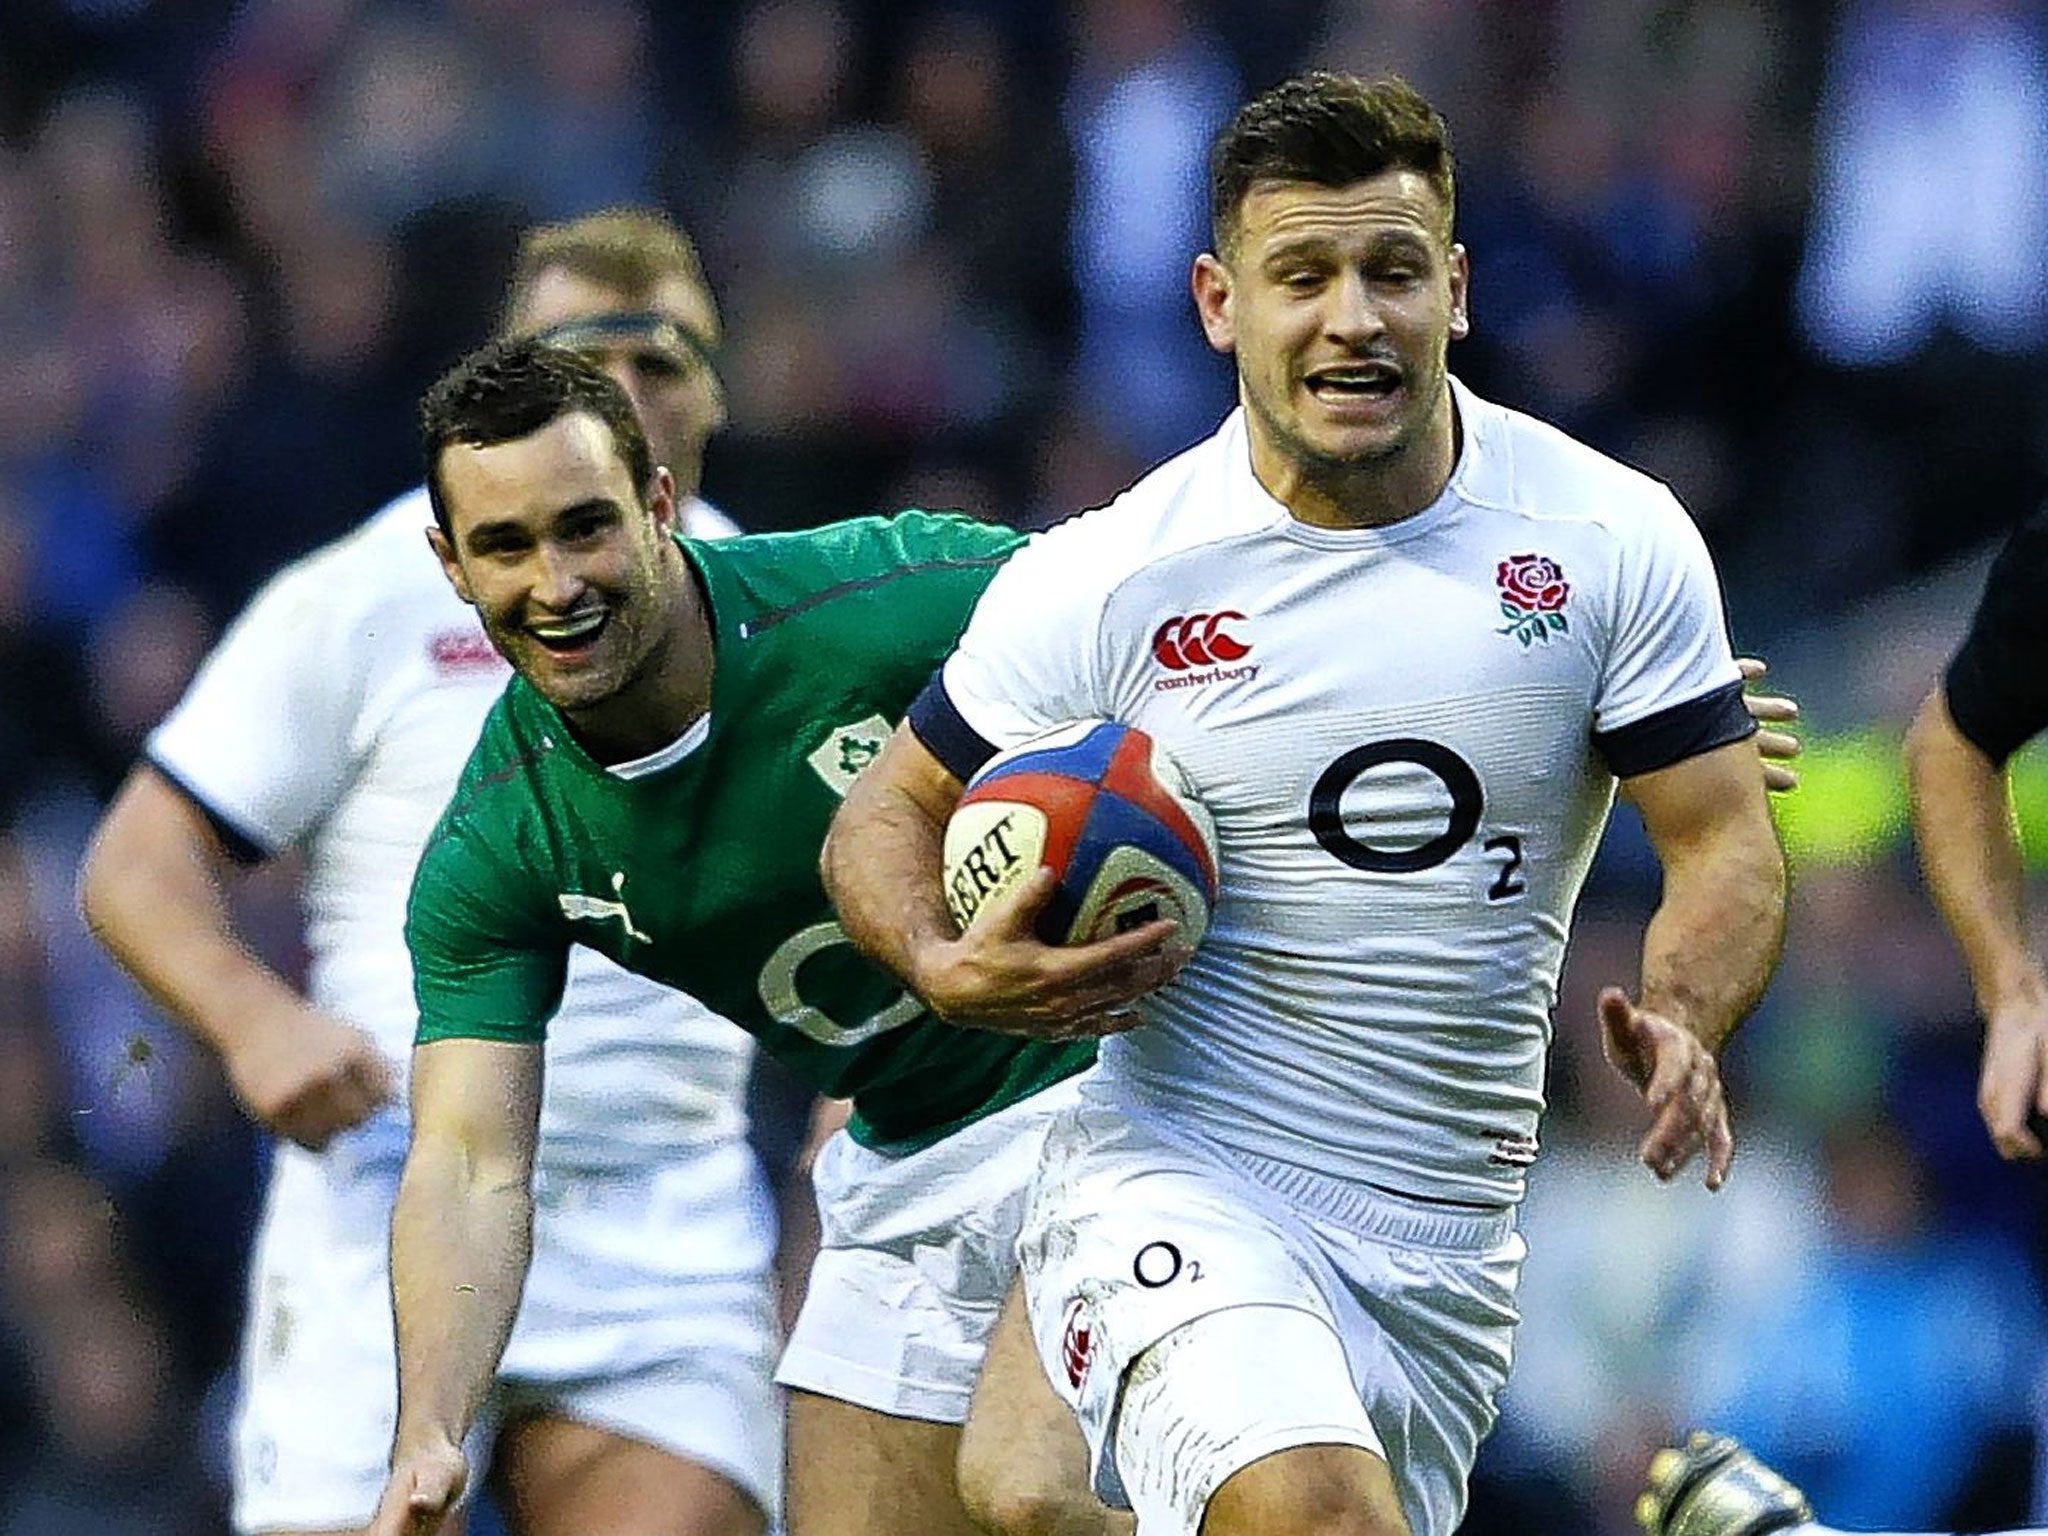 Danny Care races on to a pass from Mike Brown (on ground) to score England’s try against Ireland at Twickenham on Saturday